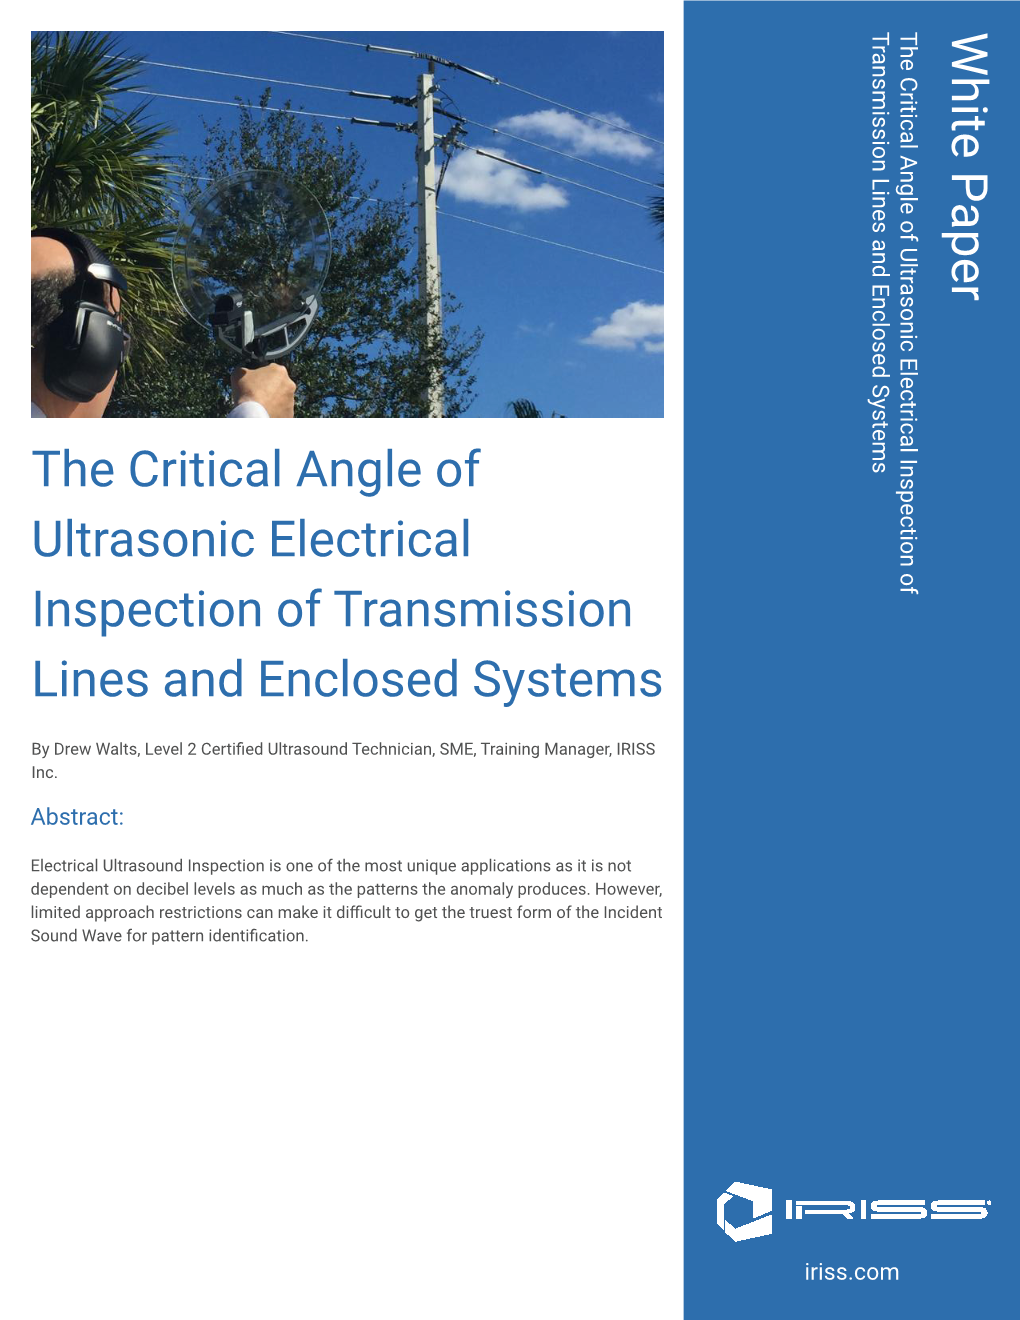 Aperthe Critical Angle of Ultrasonic Electrical Inspection Of